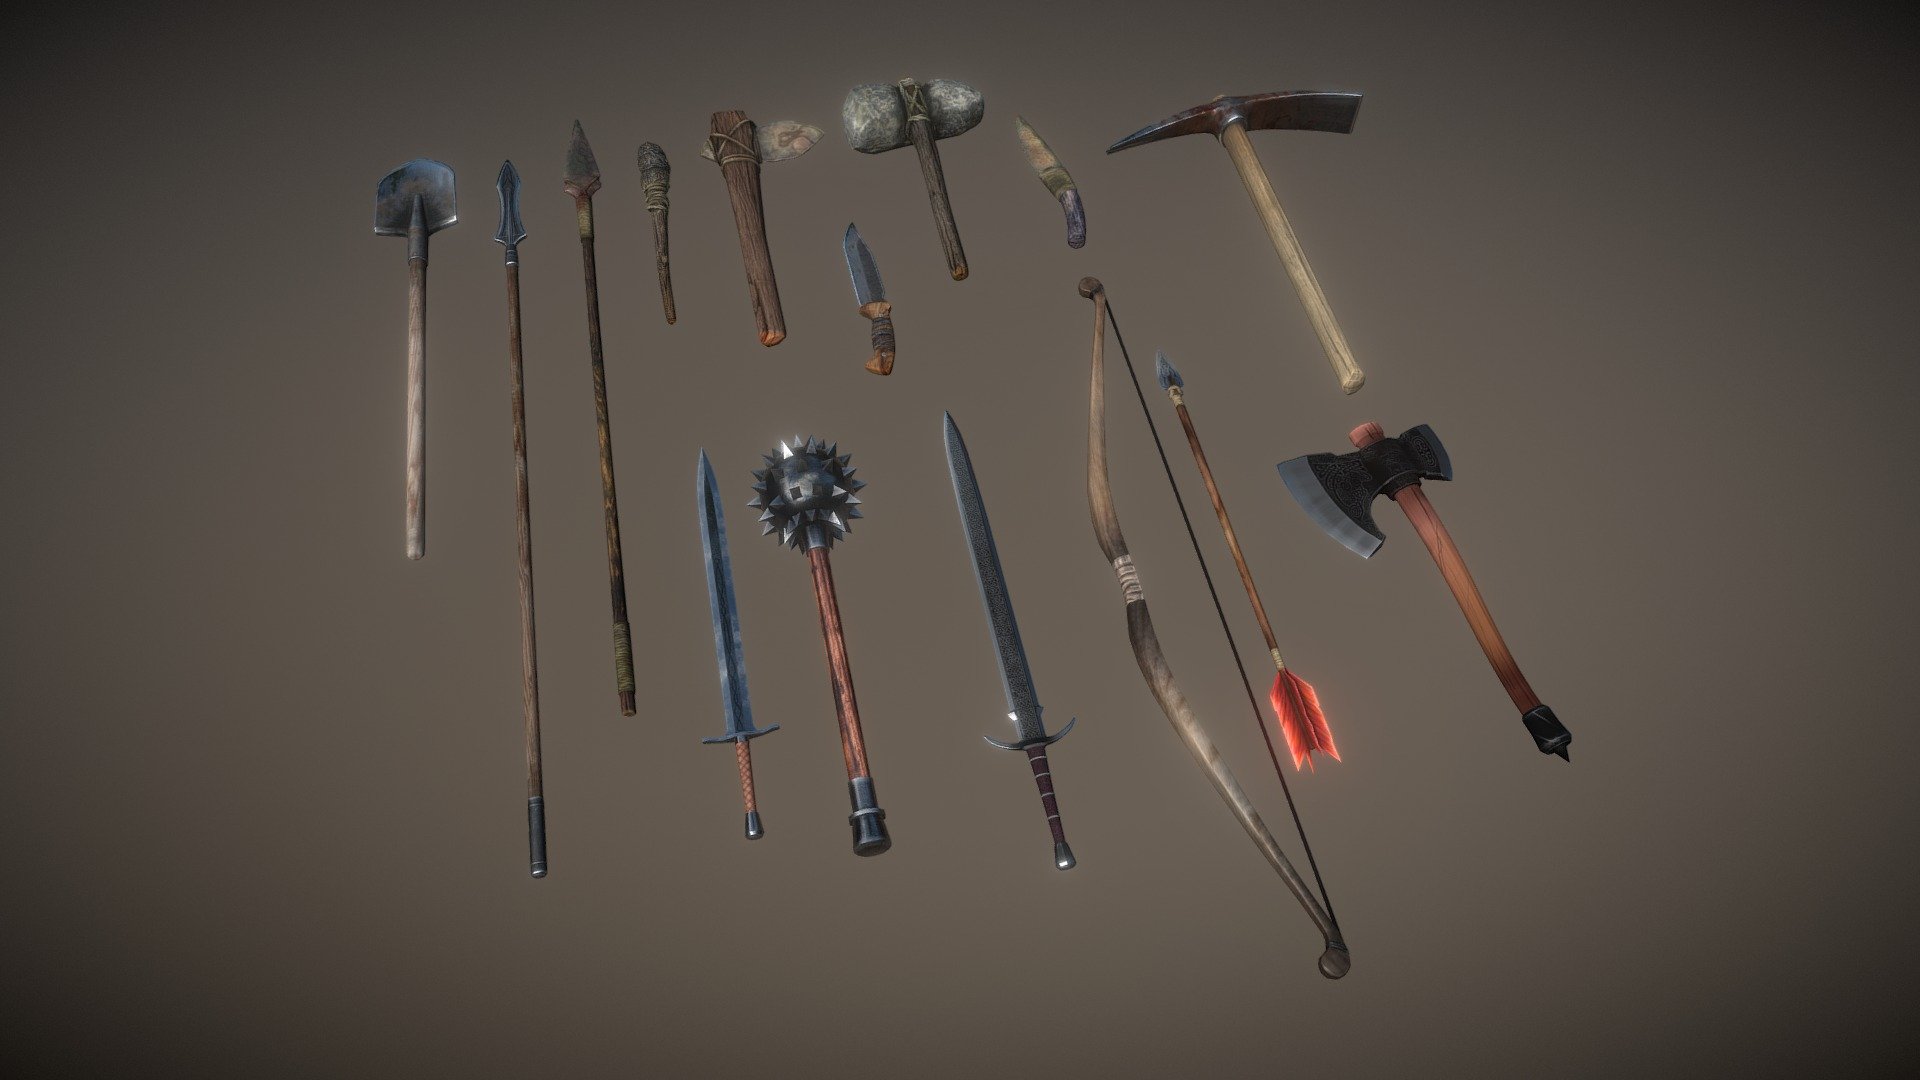 Medieval tools and weapons